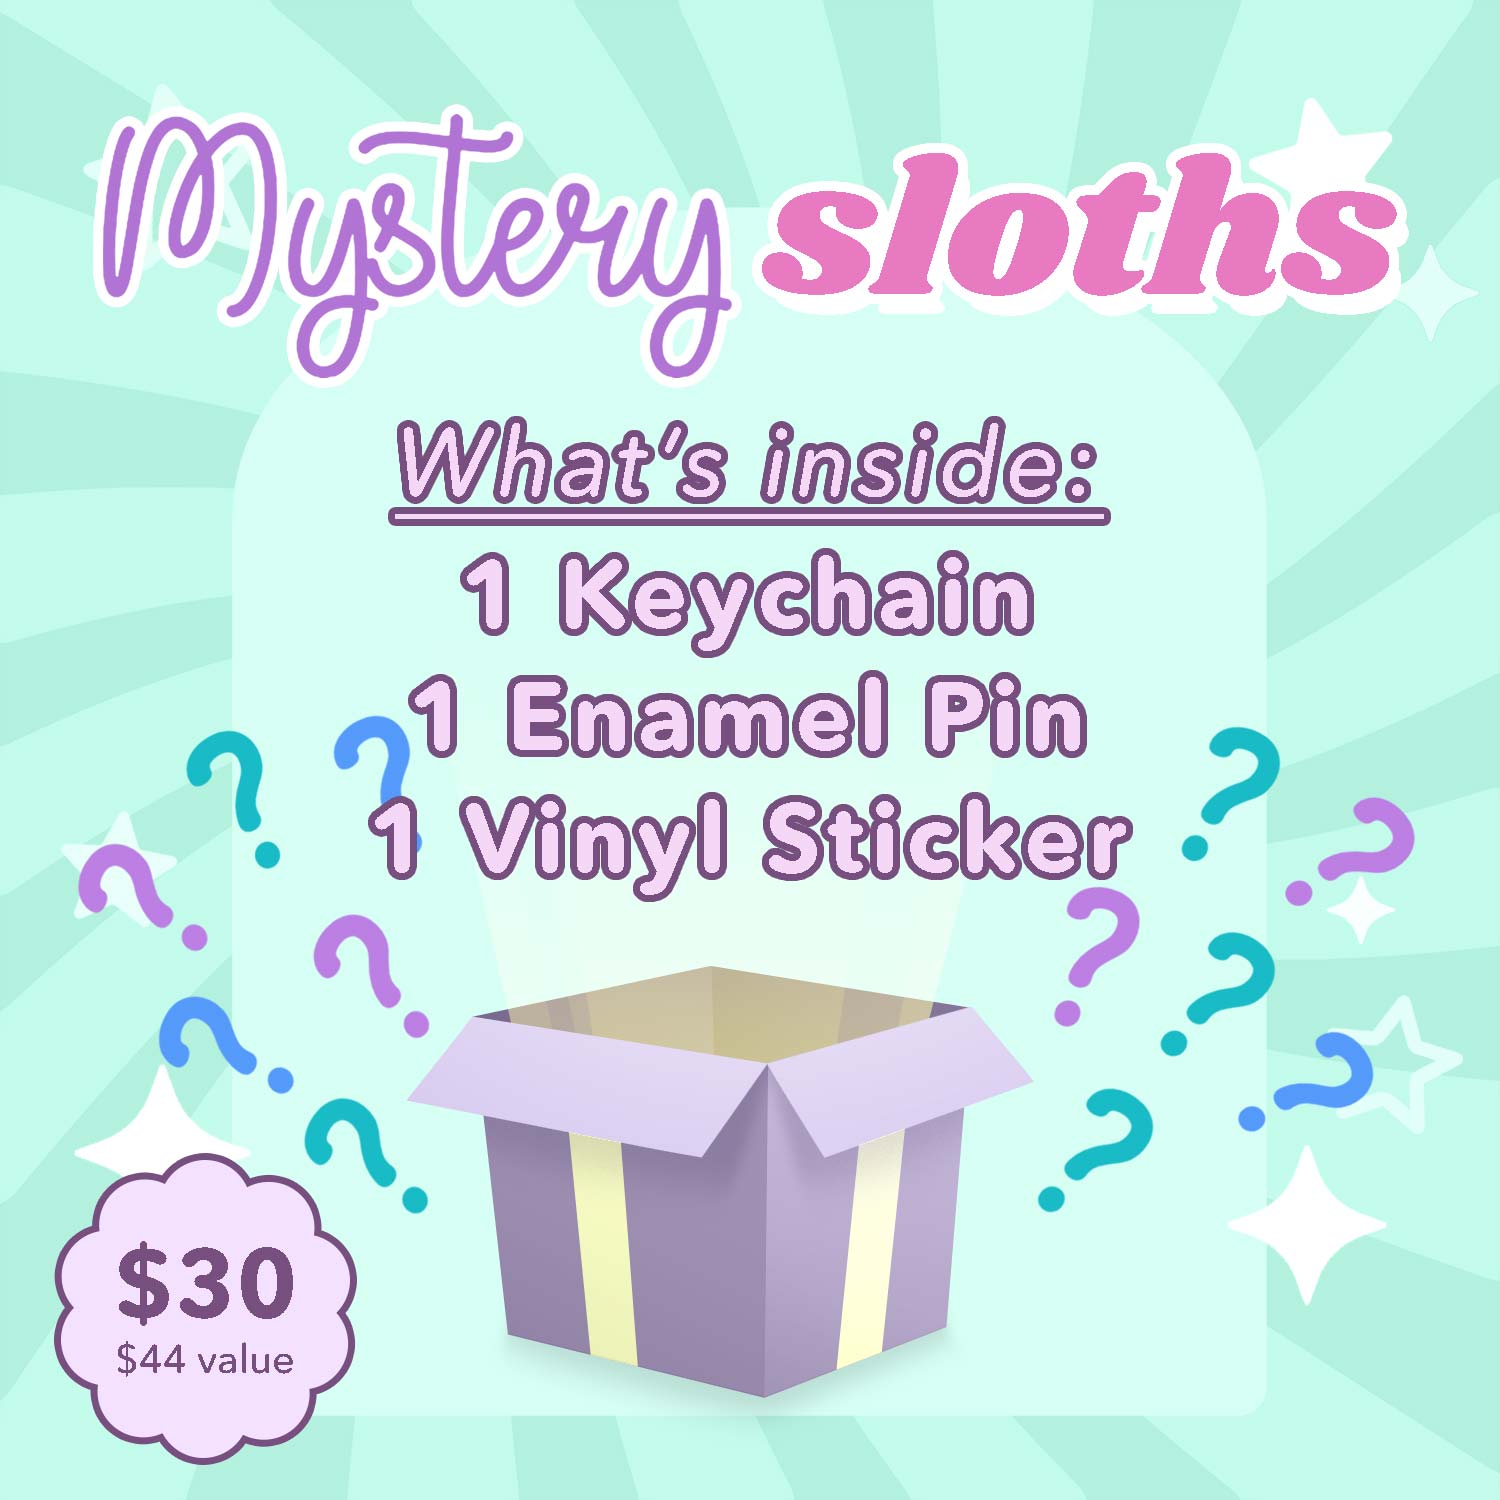 Mystery Sloth 3-Pack Brooches & Lapel Pins Flair Fighter   